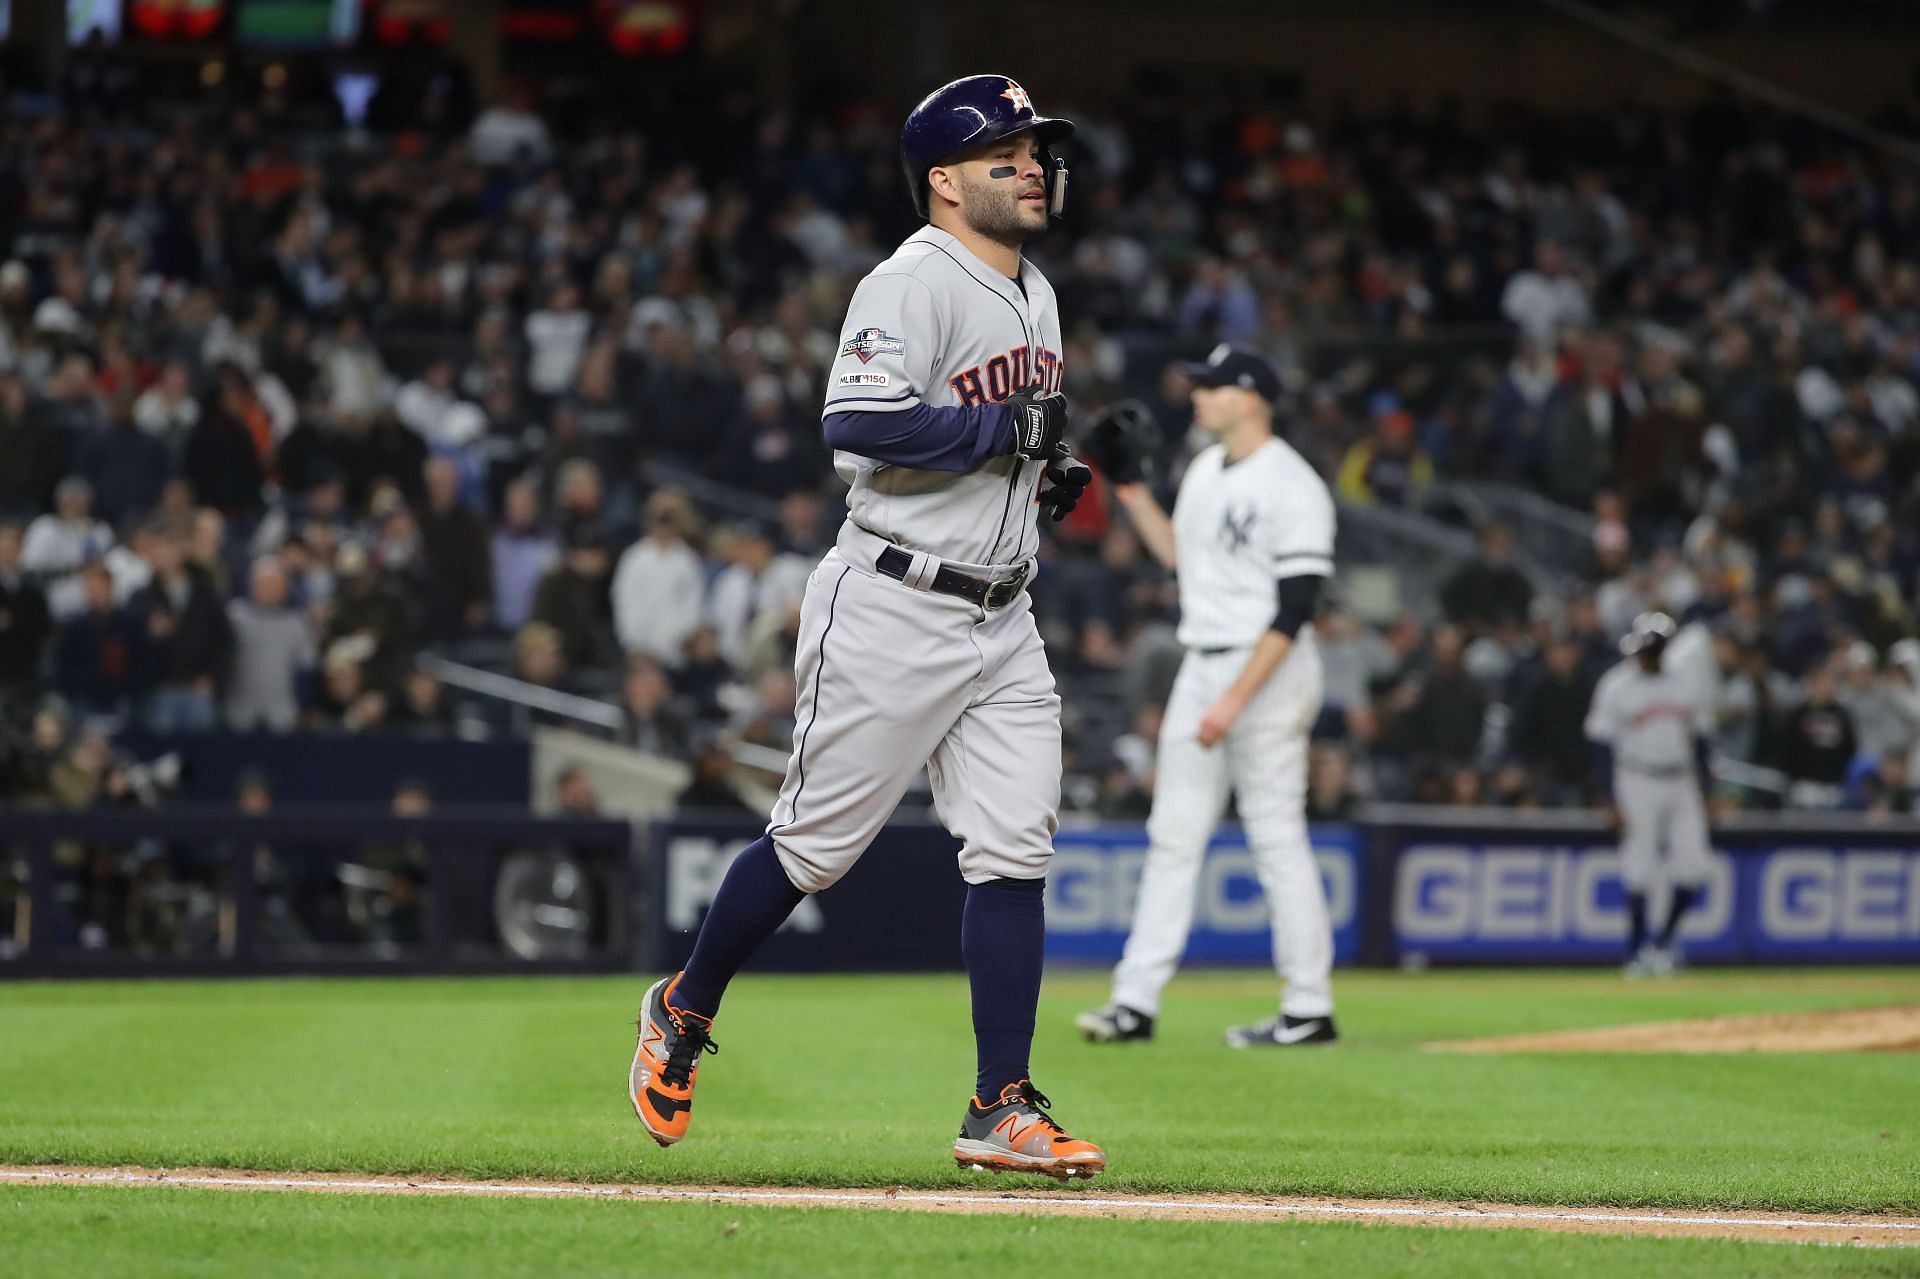 Jose Altuve walks to first base during the League Championship Series - Houston Astros v New York Yankees - Game Five.